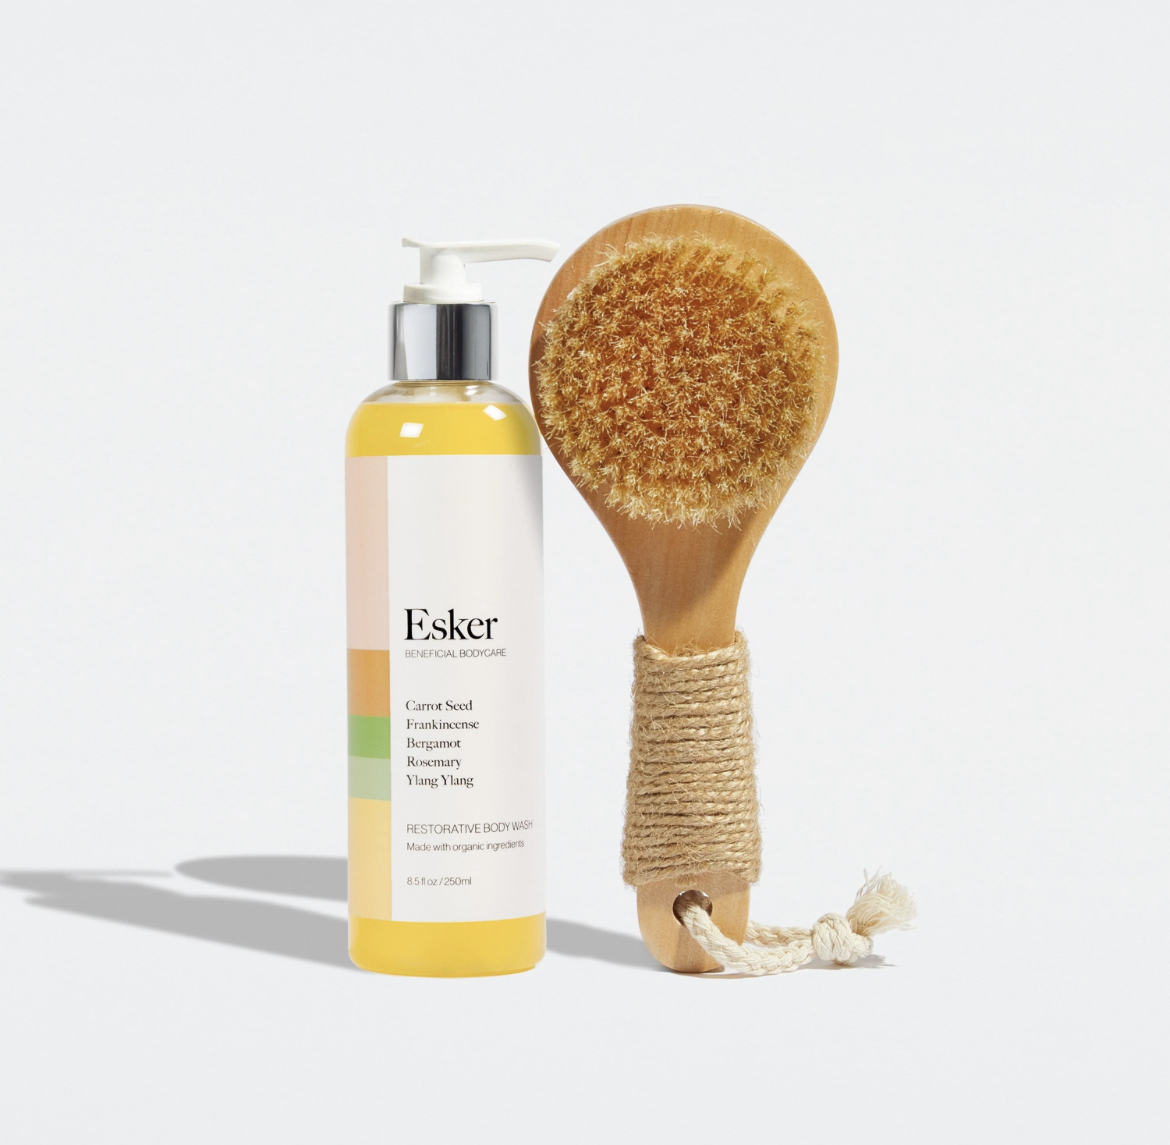 clean beauty body wash and dry brush.